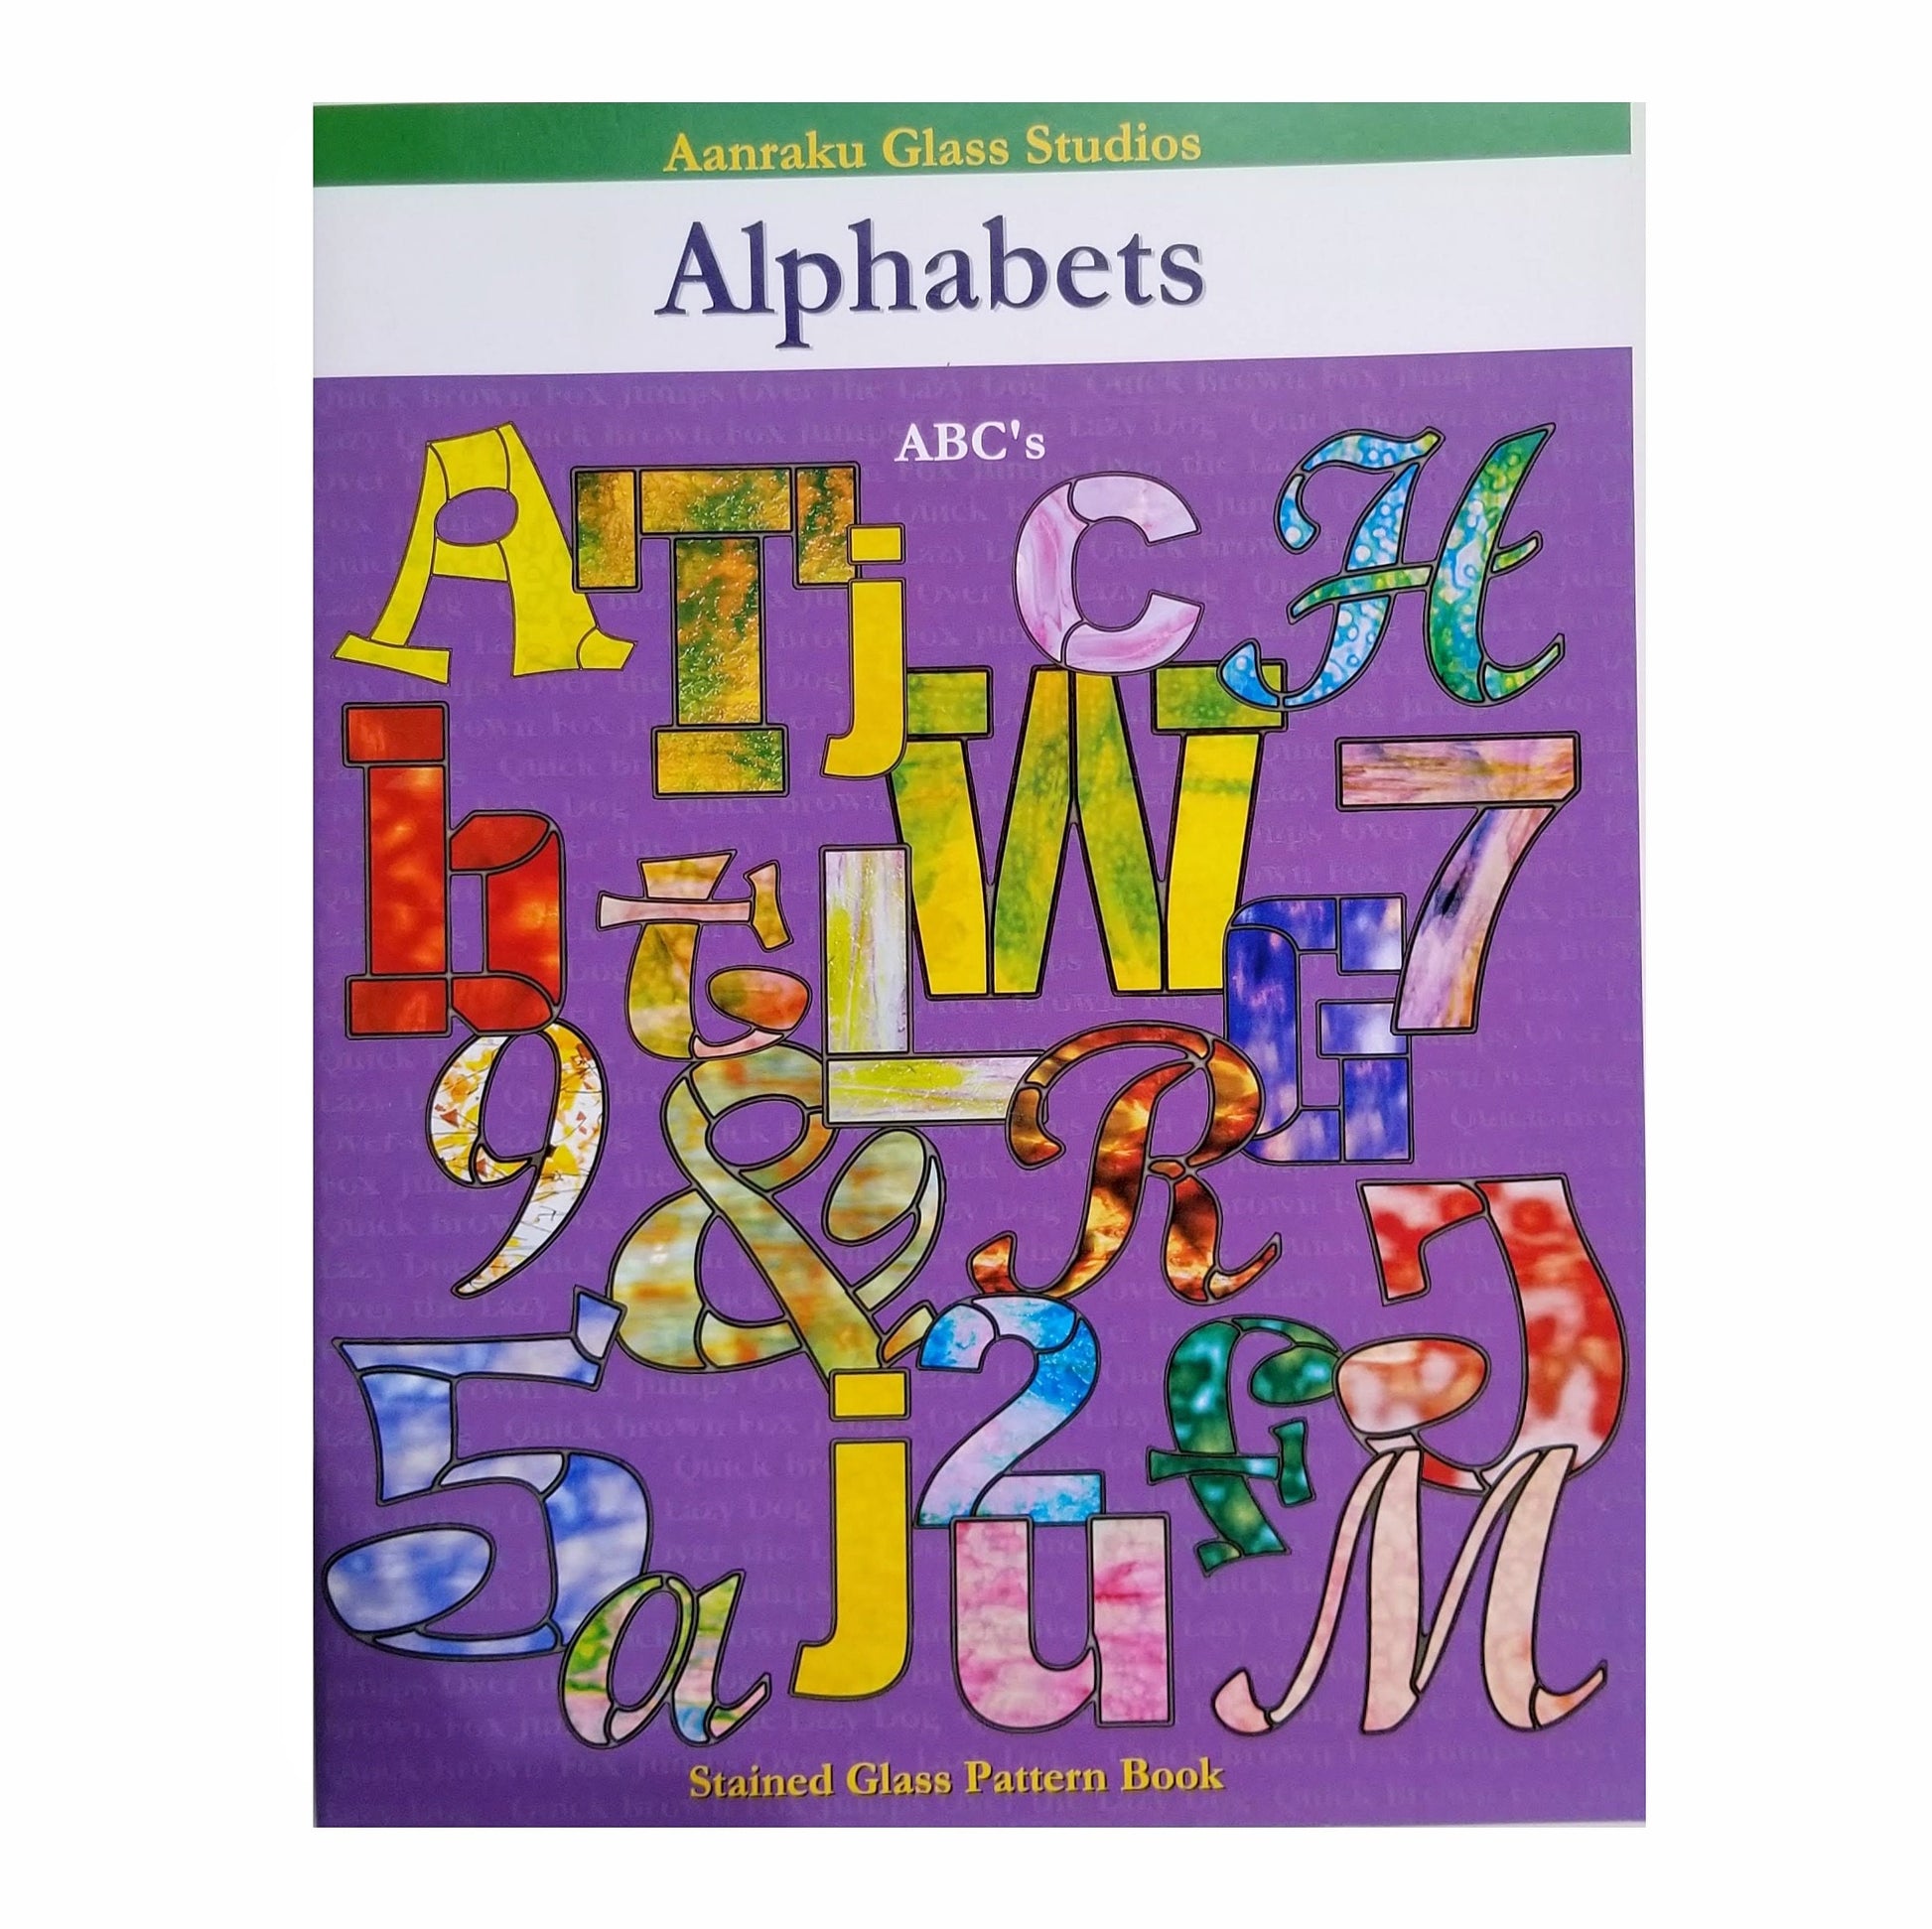 Alphabet & Numbers. Stained Glass Pattern, Lettering Book. Diy Signs,  Windows, Suncatcher projects. Traditional, Modern Fonts Calligraphy.